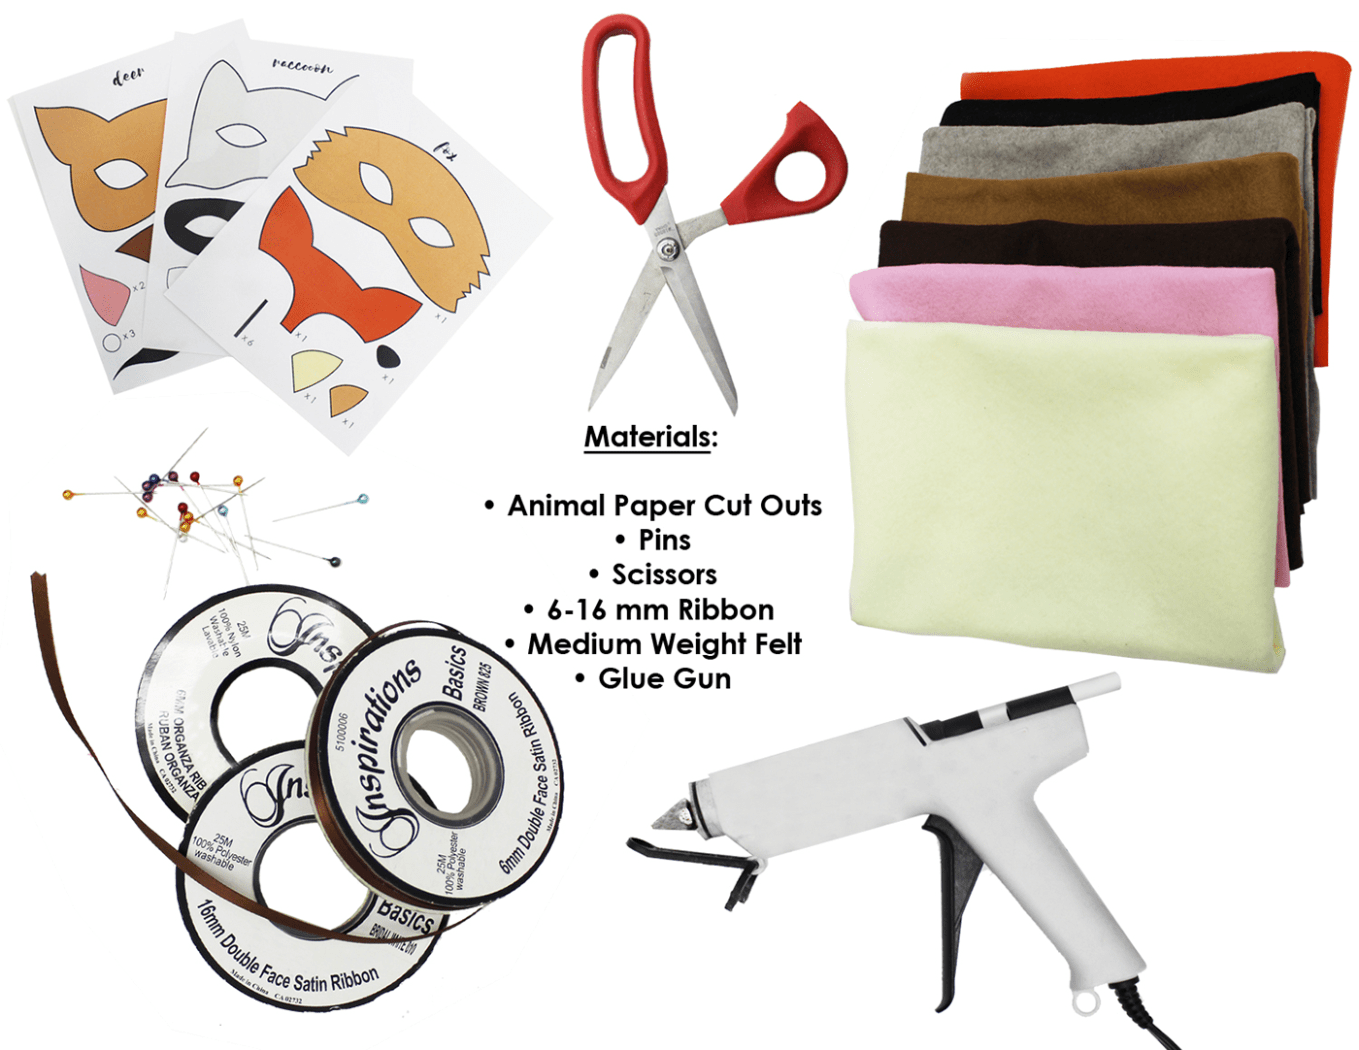 Materials needed for felt mask DIY project